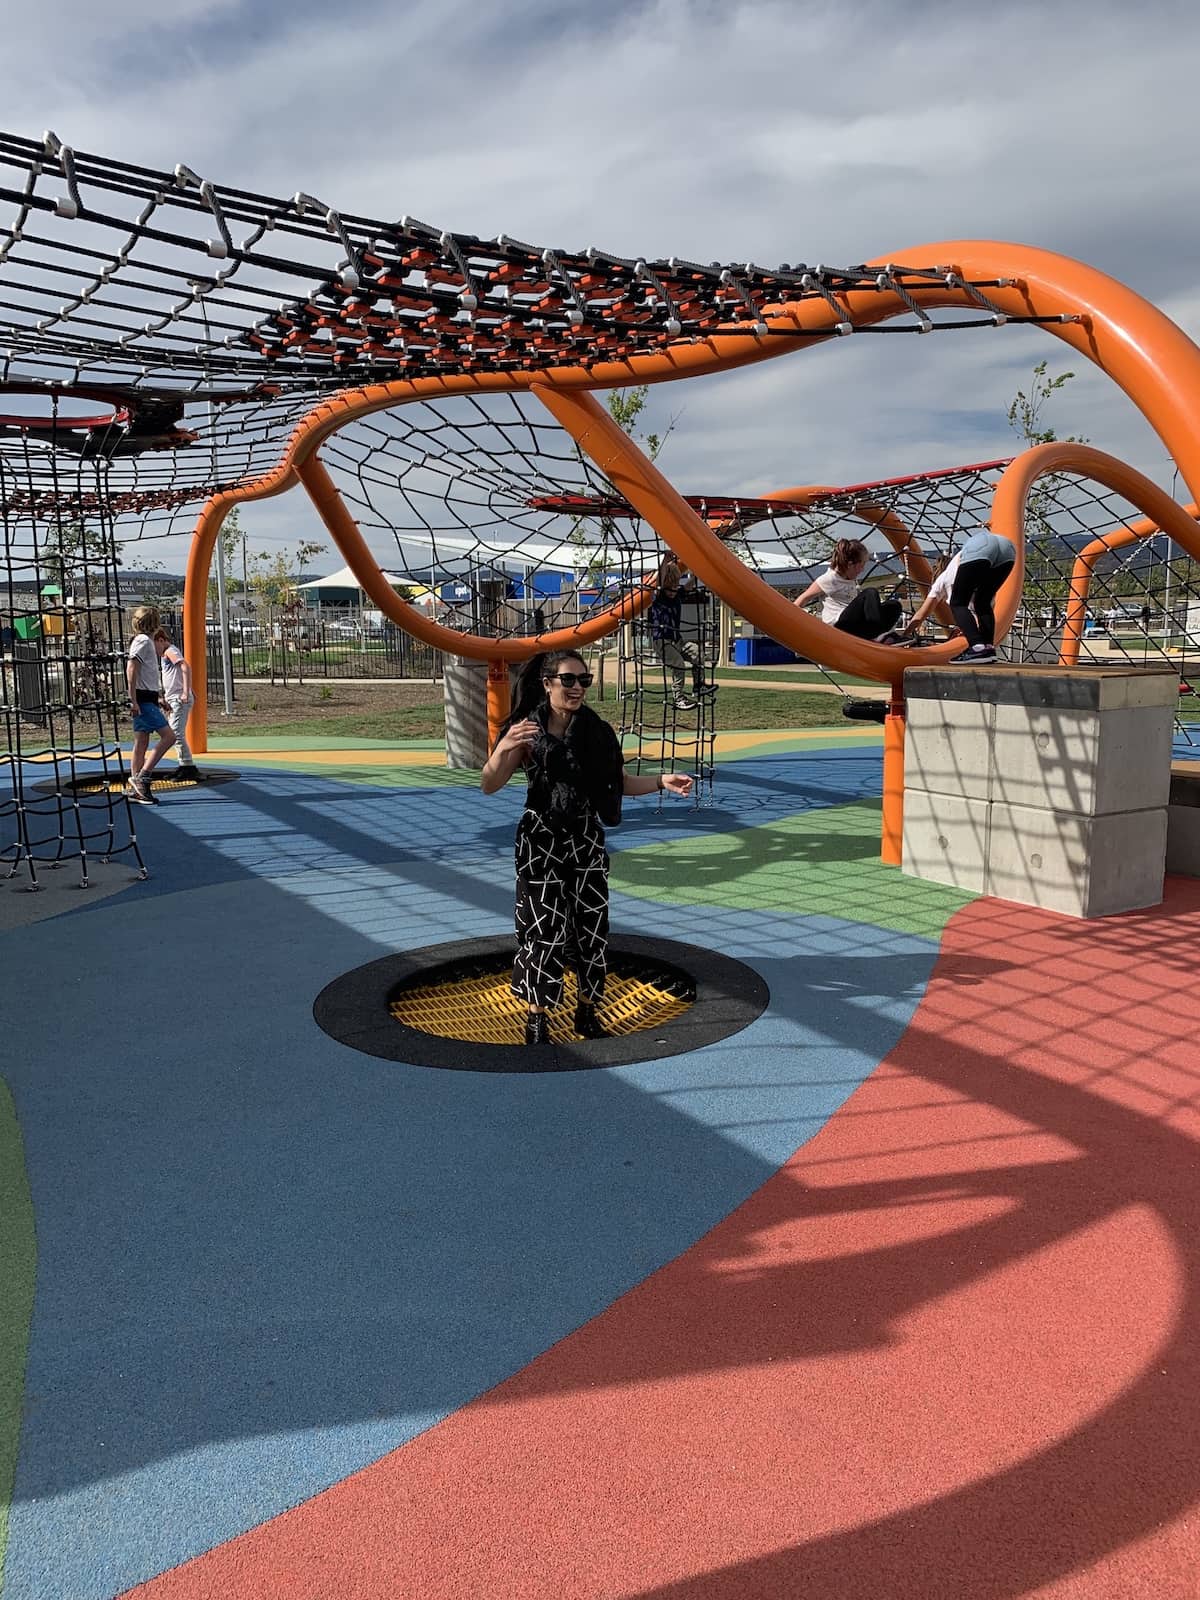 A woman in a black patterned jumpsuit, wearing sunglasses, jumping in a shallow hole in a children’s playground. The hole is covered with flexible structure that makes the surface look bouncy